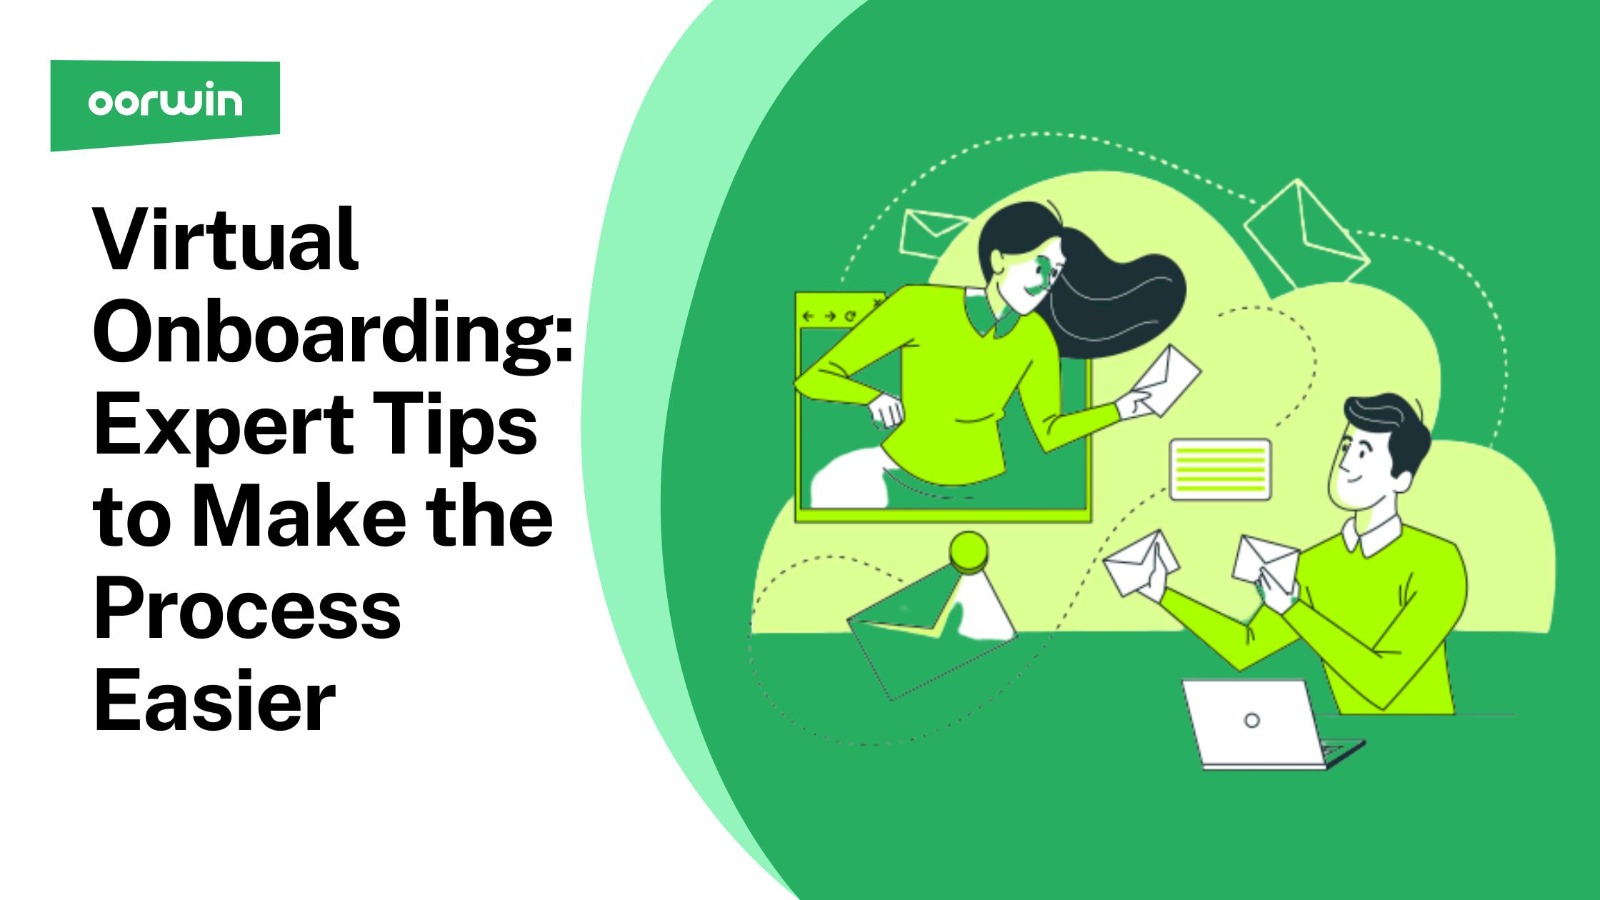 Virtual Onboarding: Expert Tips to Make the Process Easier